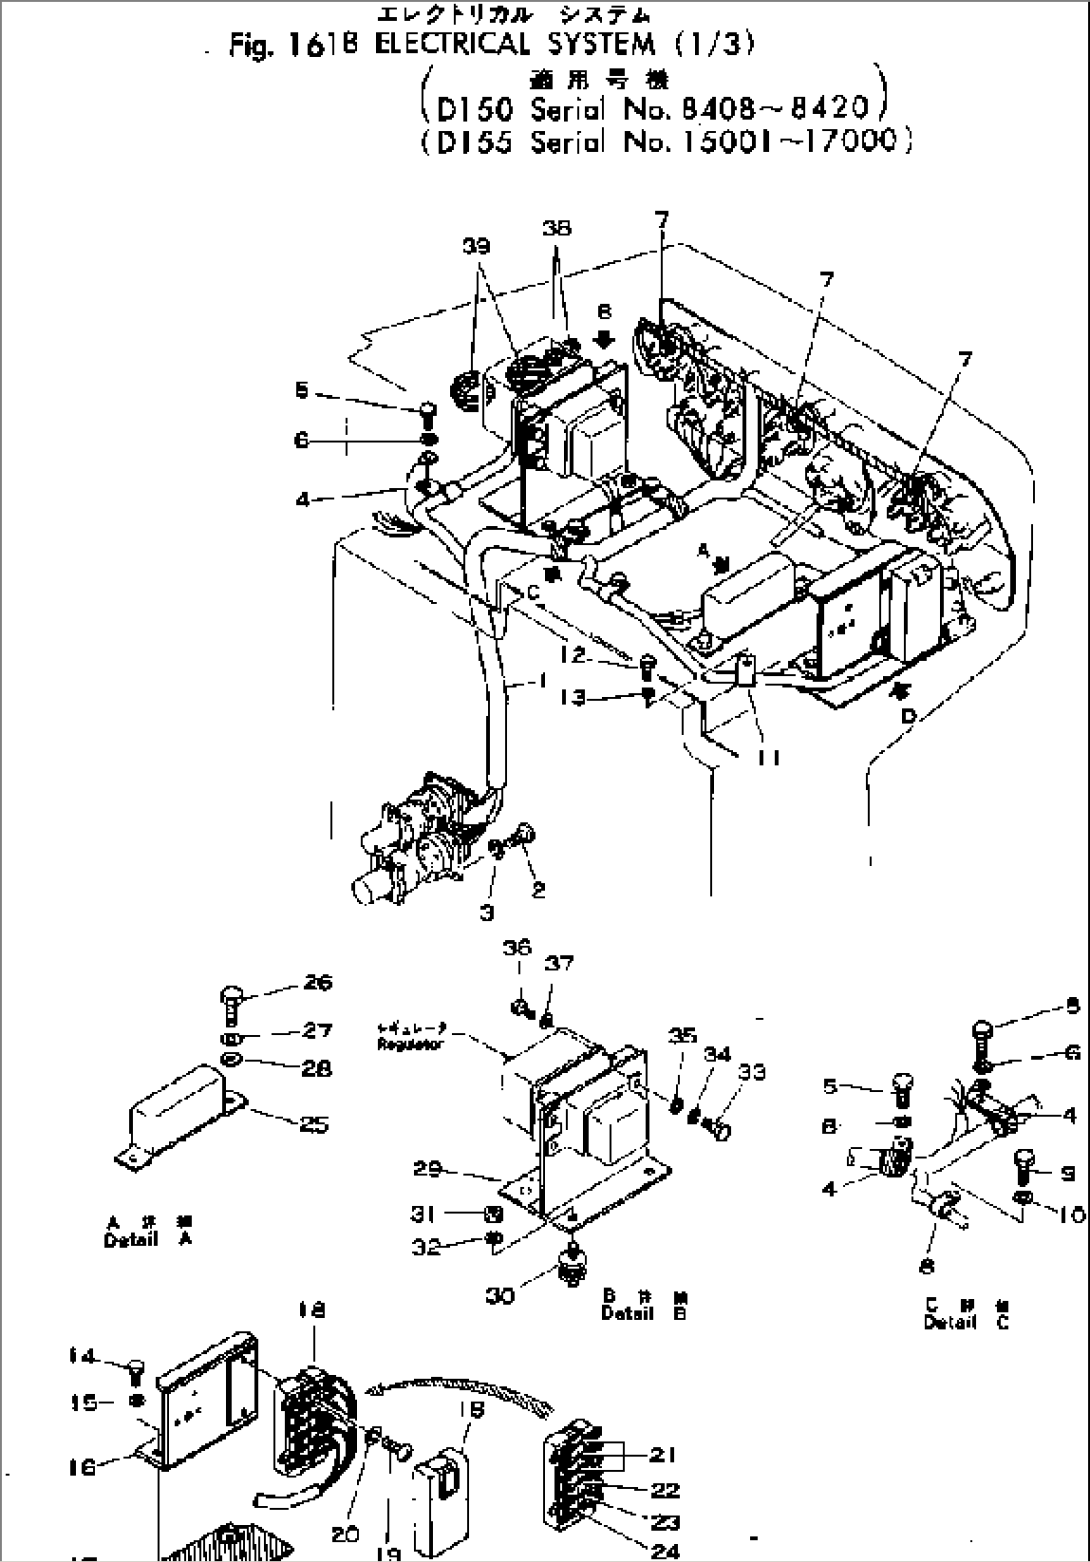 ELECTRICAL SYSTEM (1/3)(#8408-8420)